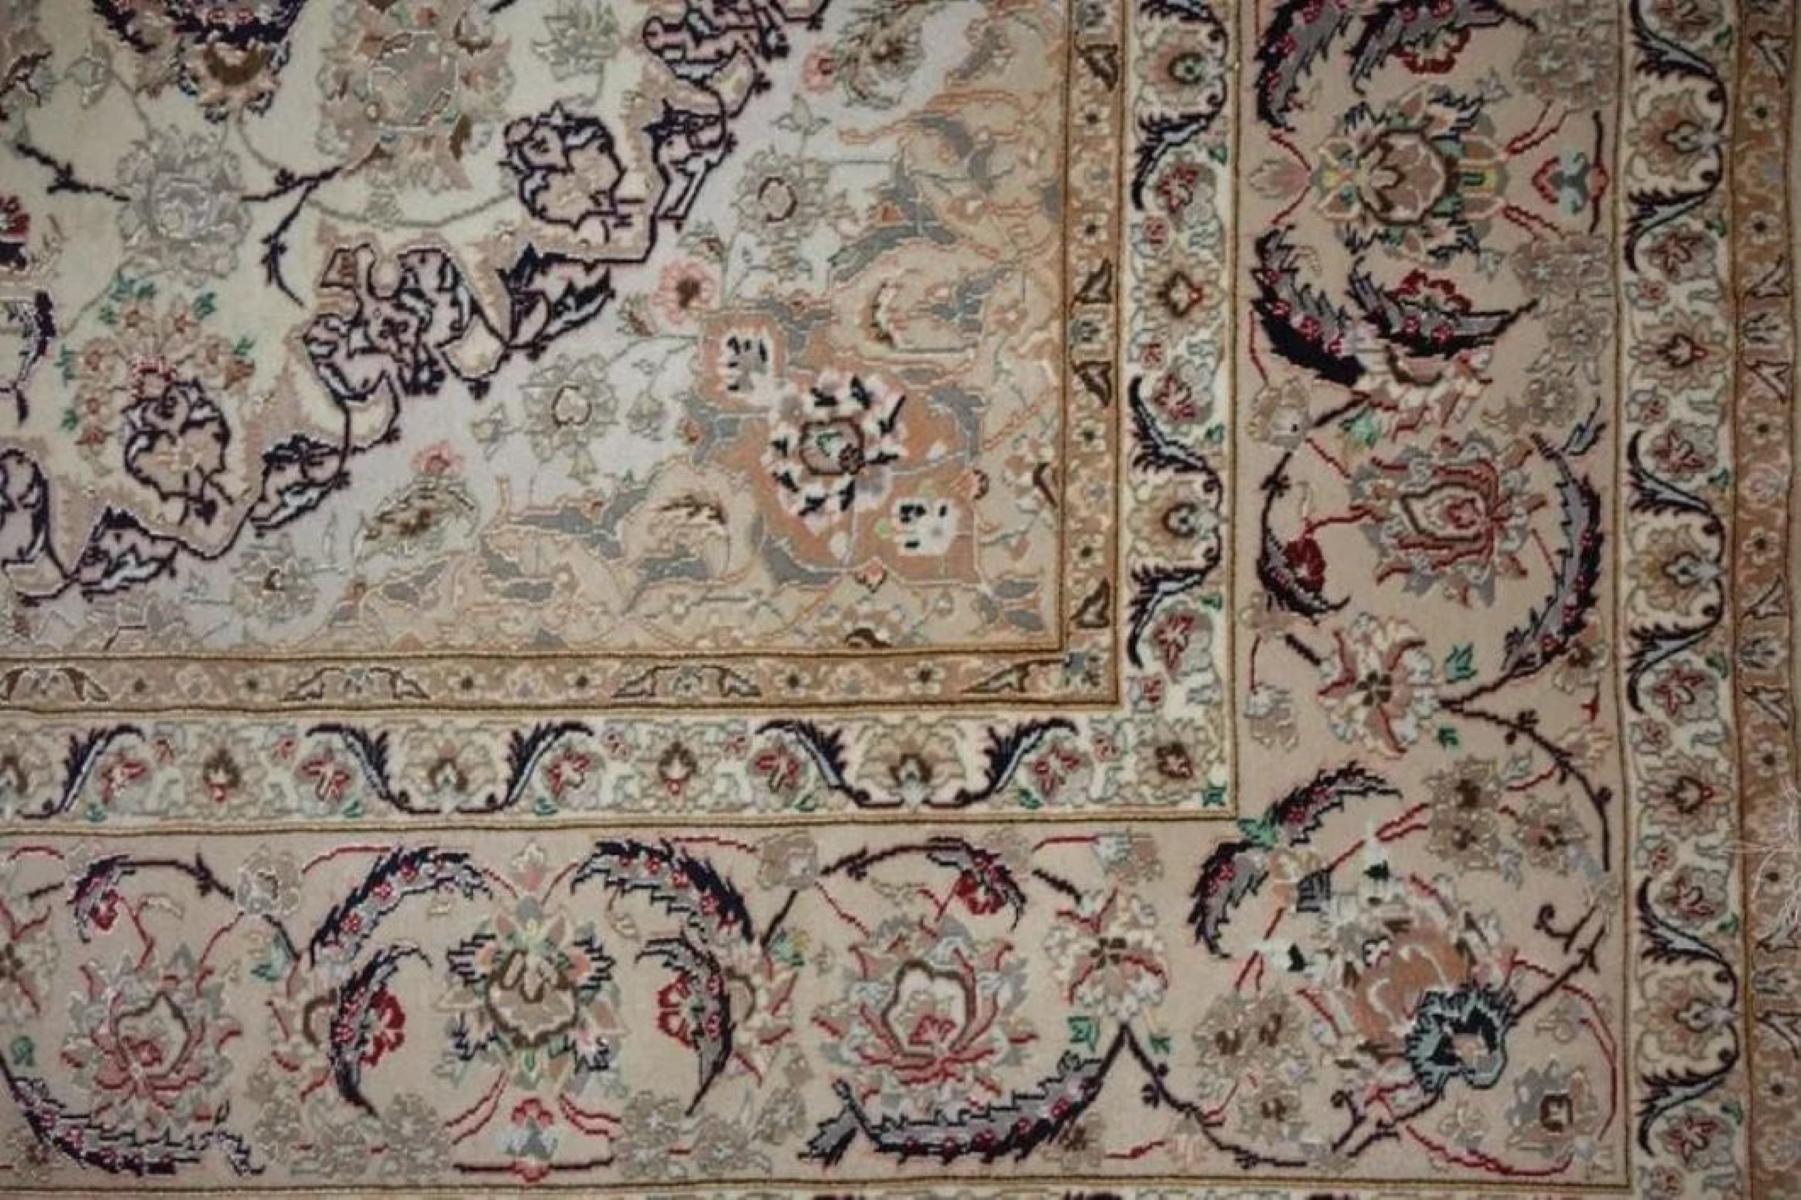 Very fine Persian Rug Isfahan 600 Knots per inch, Size 11.6 x 8.4 Iran Isfahan Enishri Wool and Silk with a Silk Foundation. Around 8,000,000 knots tied by hand one by one. It takes 5 years to complete this piece of art.